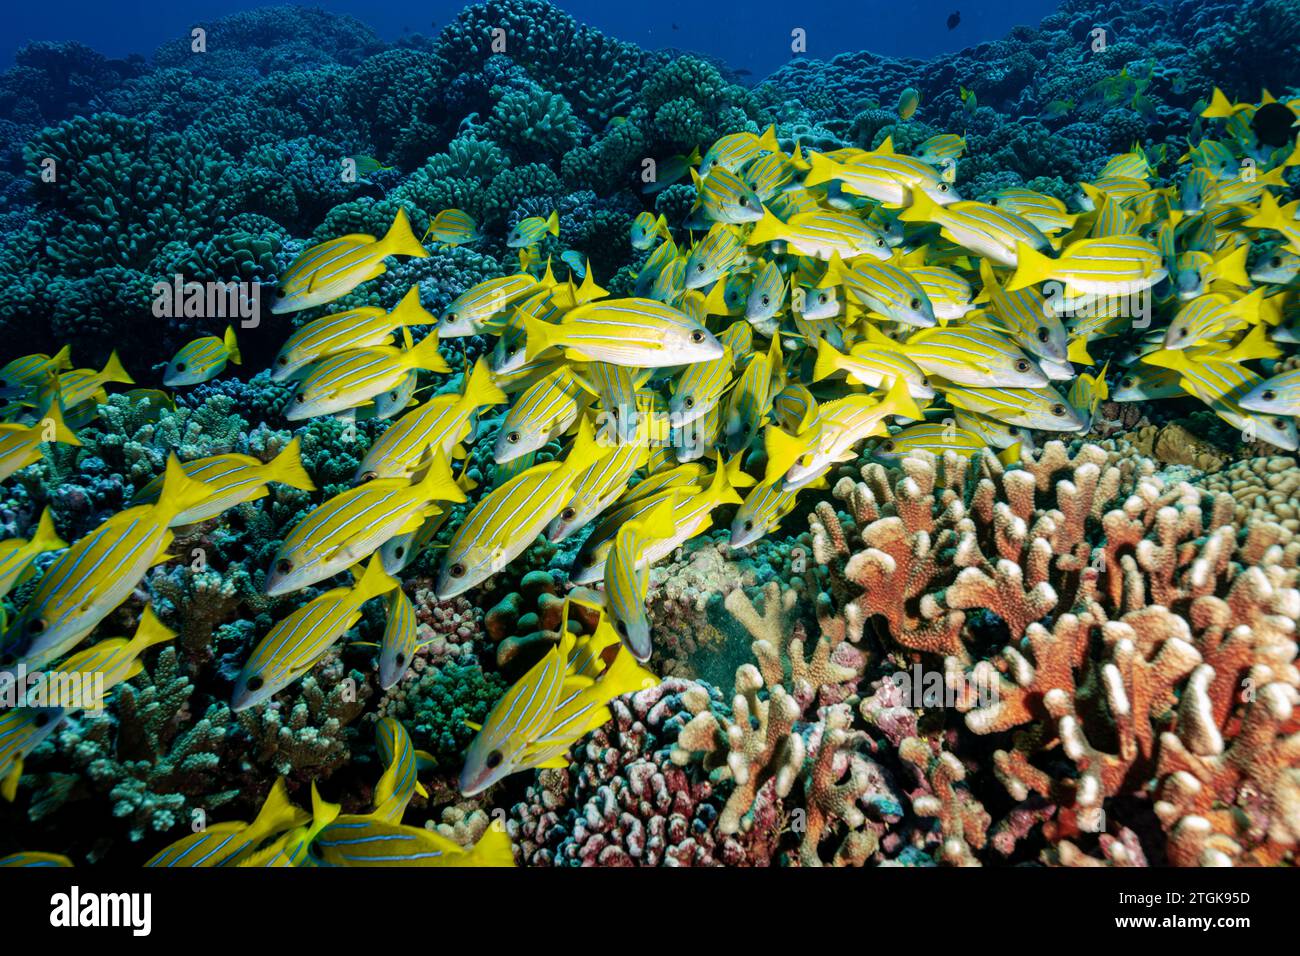 French Polynesia, Fakarava South, A school of Five-lined Snapper (Lutjanus quinquelineatus) Stock Photo